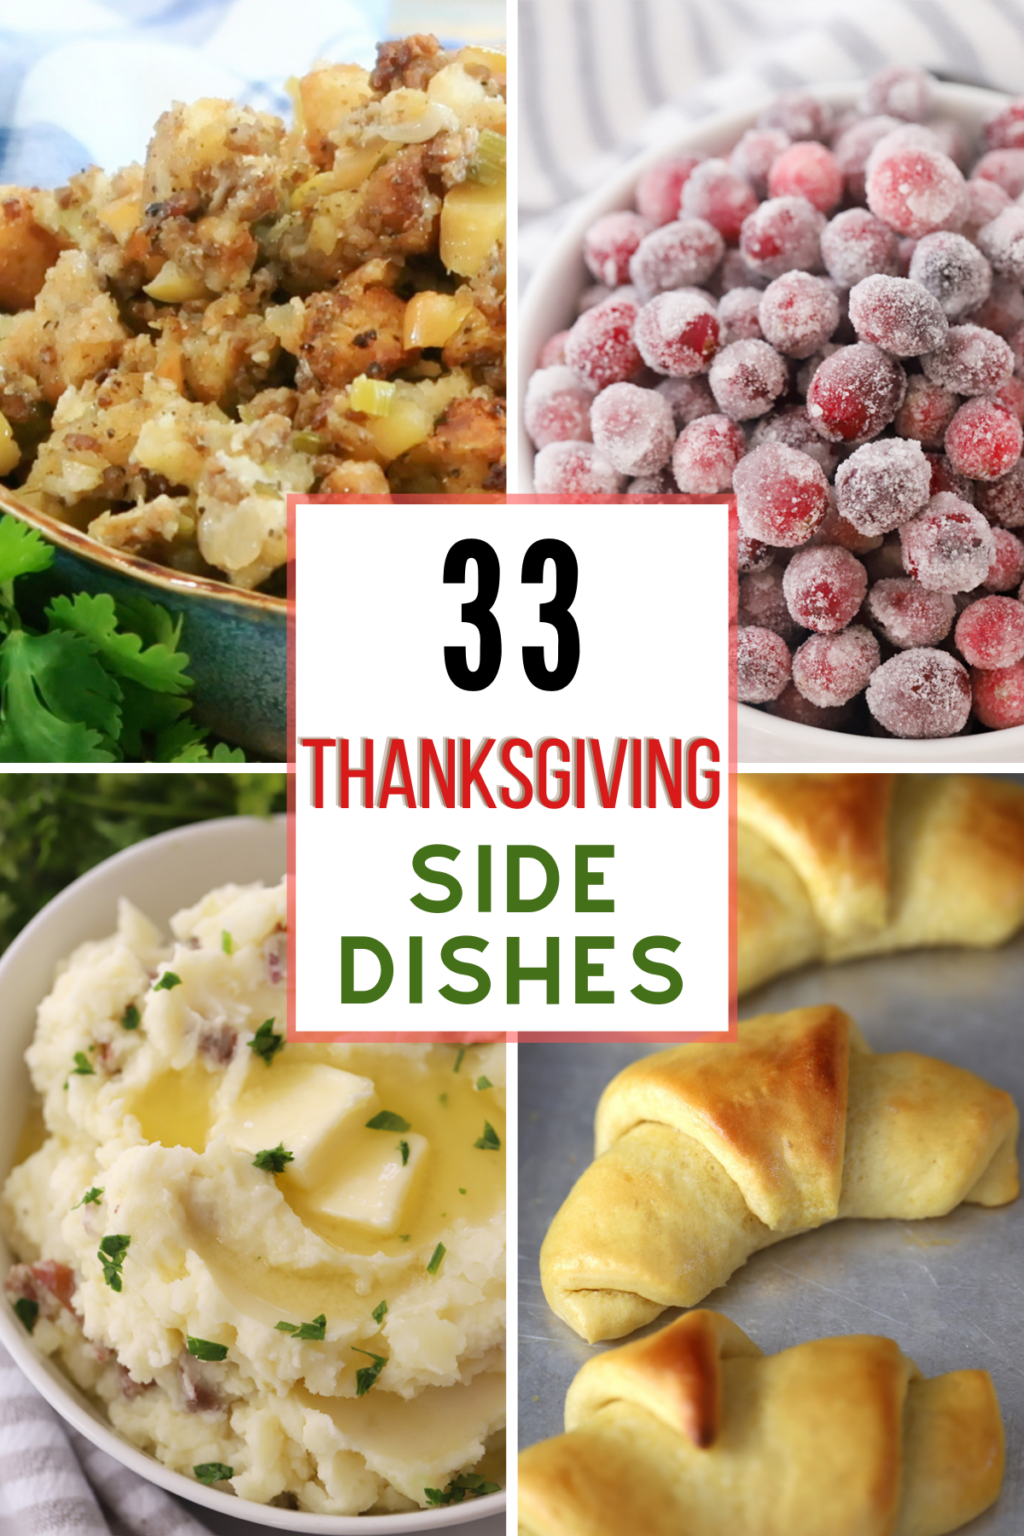 33 Best Thanksgiving Side Dishes - The Carefree Kitchen